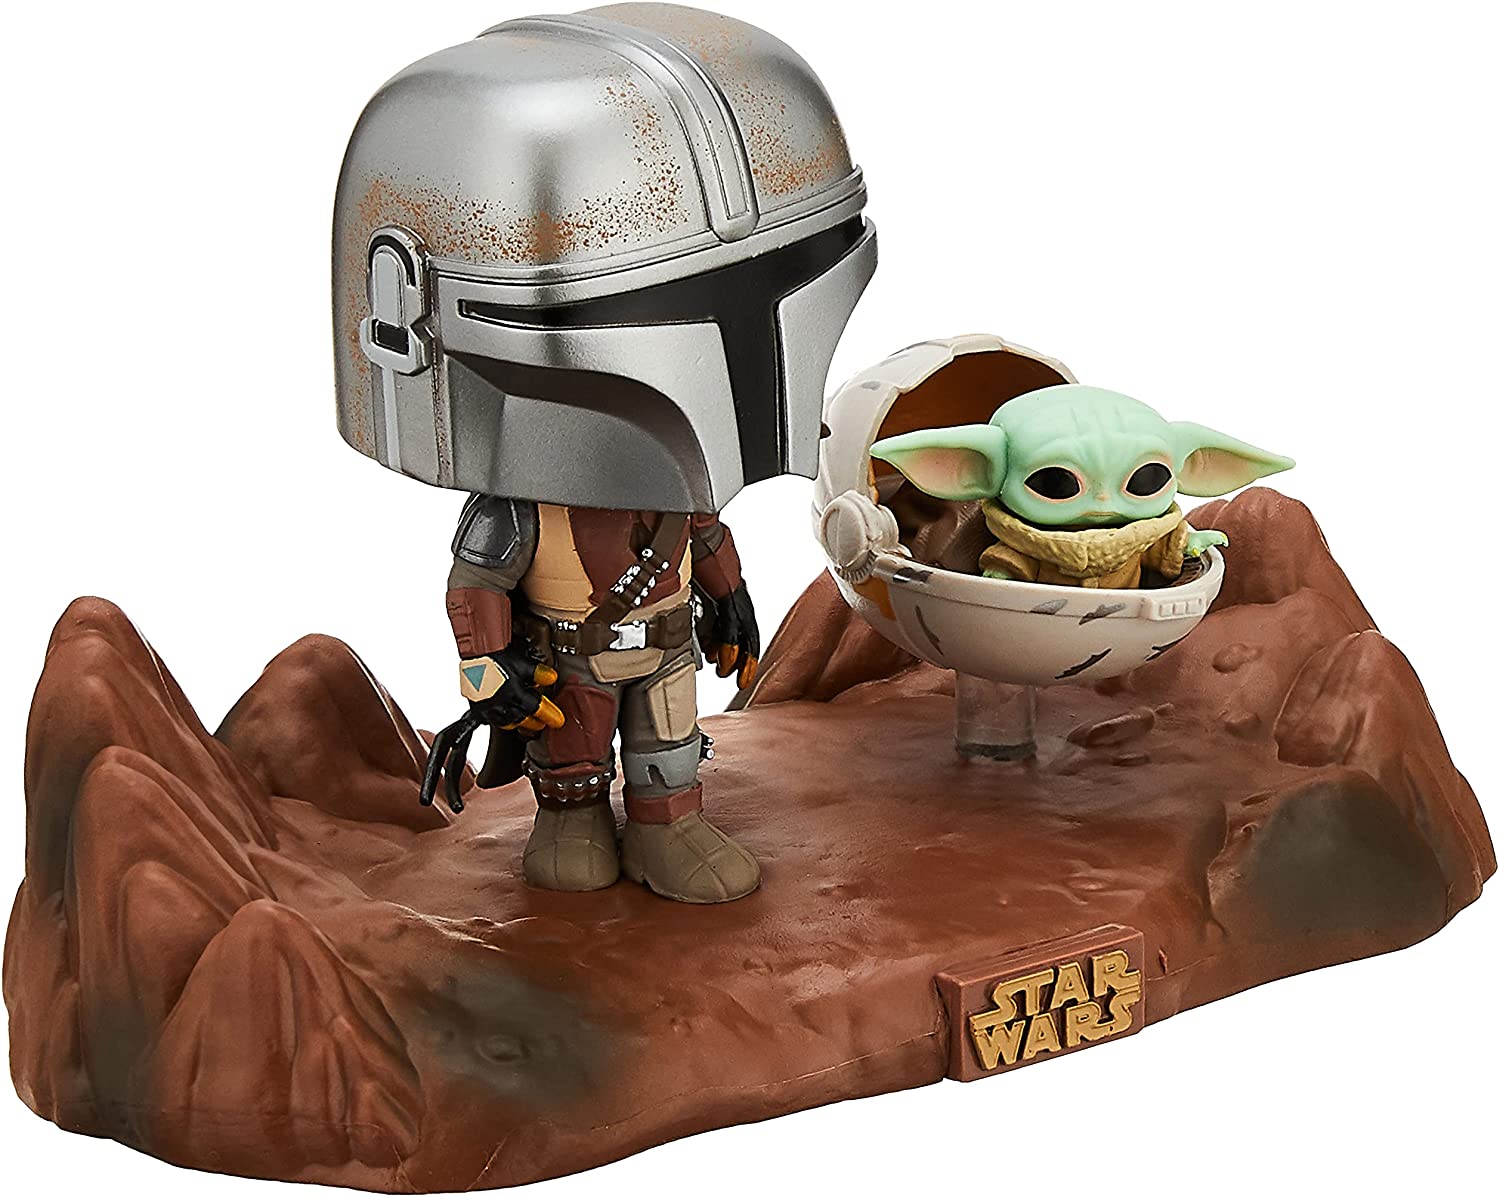 Funko Pop! Moment Star Wars: The Mandalorian and Child Vinyl Bobblehead $12 + Free Shipping w/ Prime or $25+